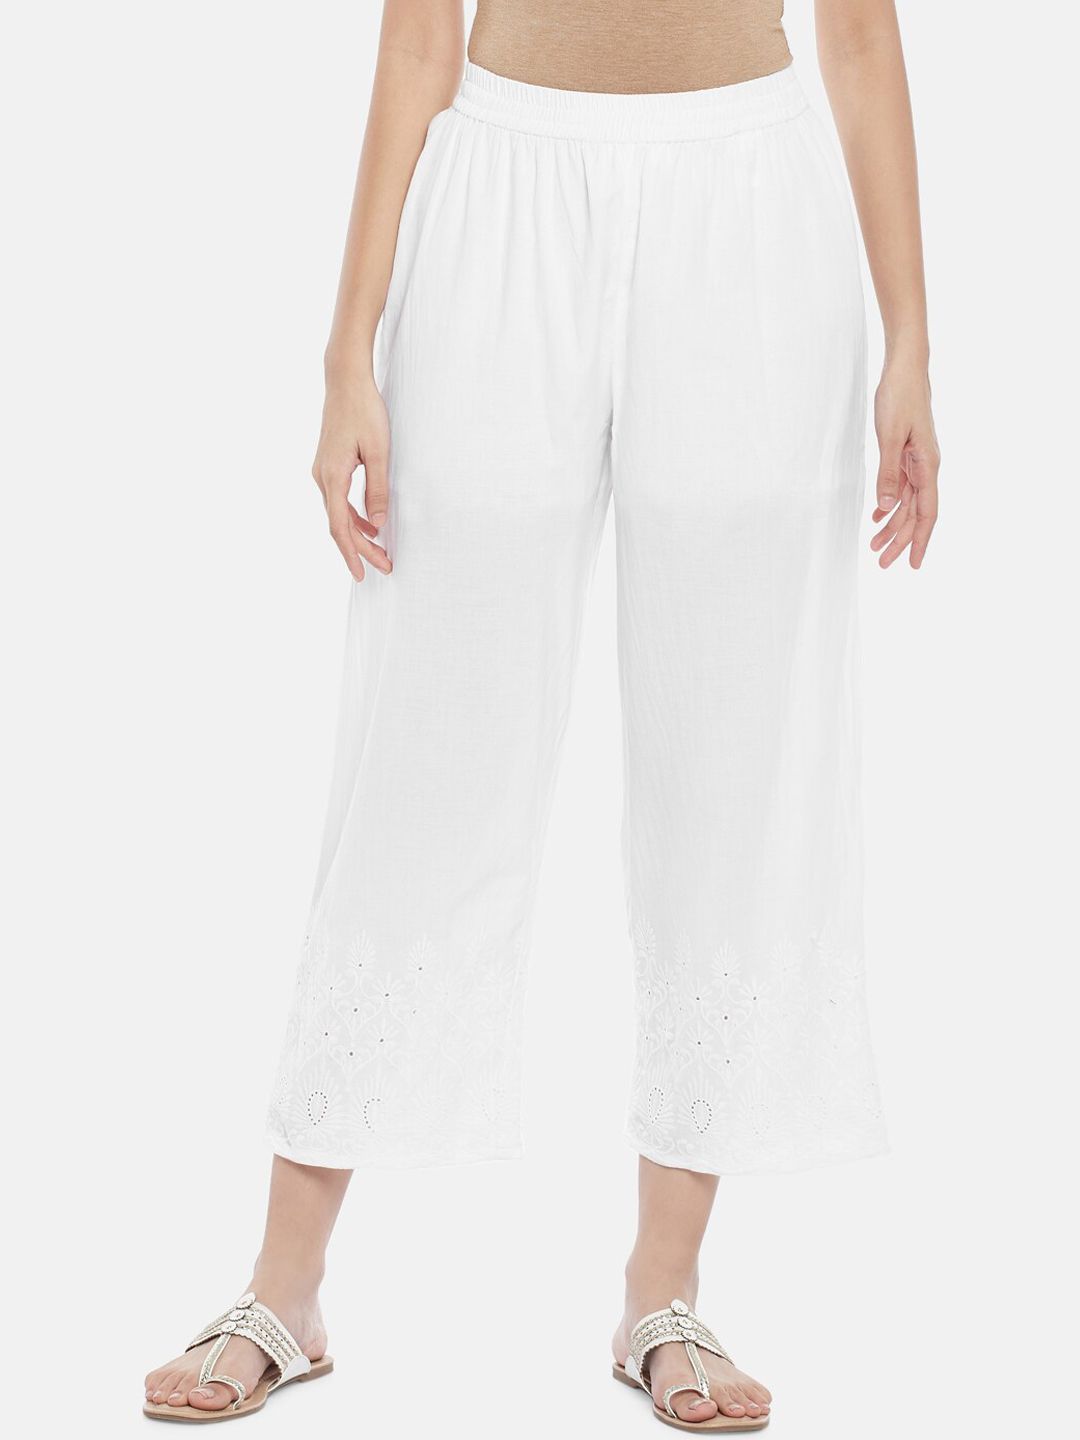 RANGMANCH BY PANTALOONS Women White Pure Cotton Culottes Trousers Price in India